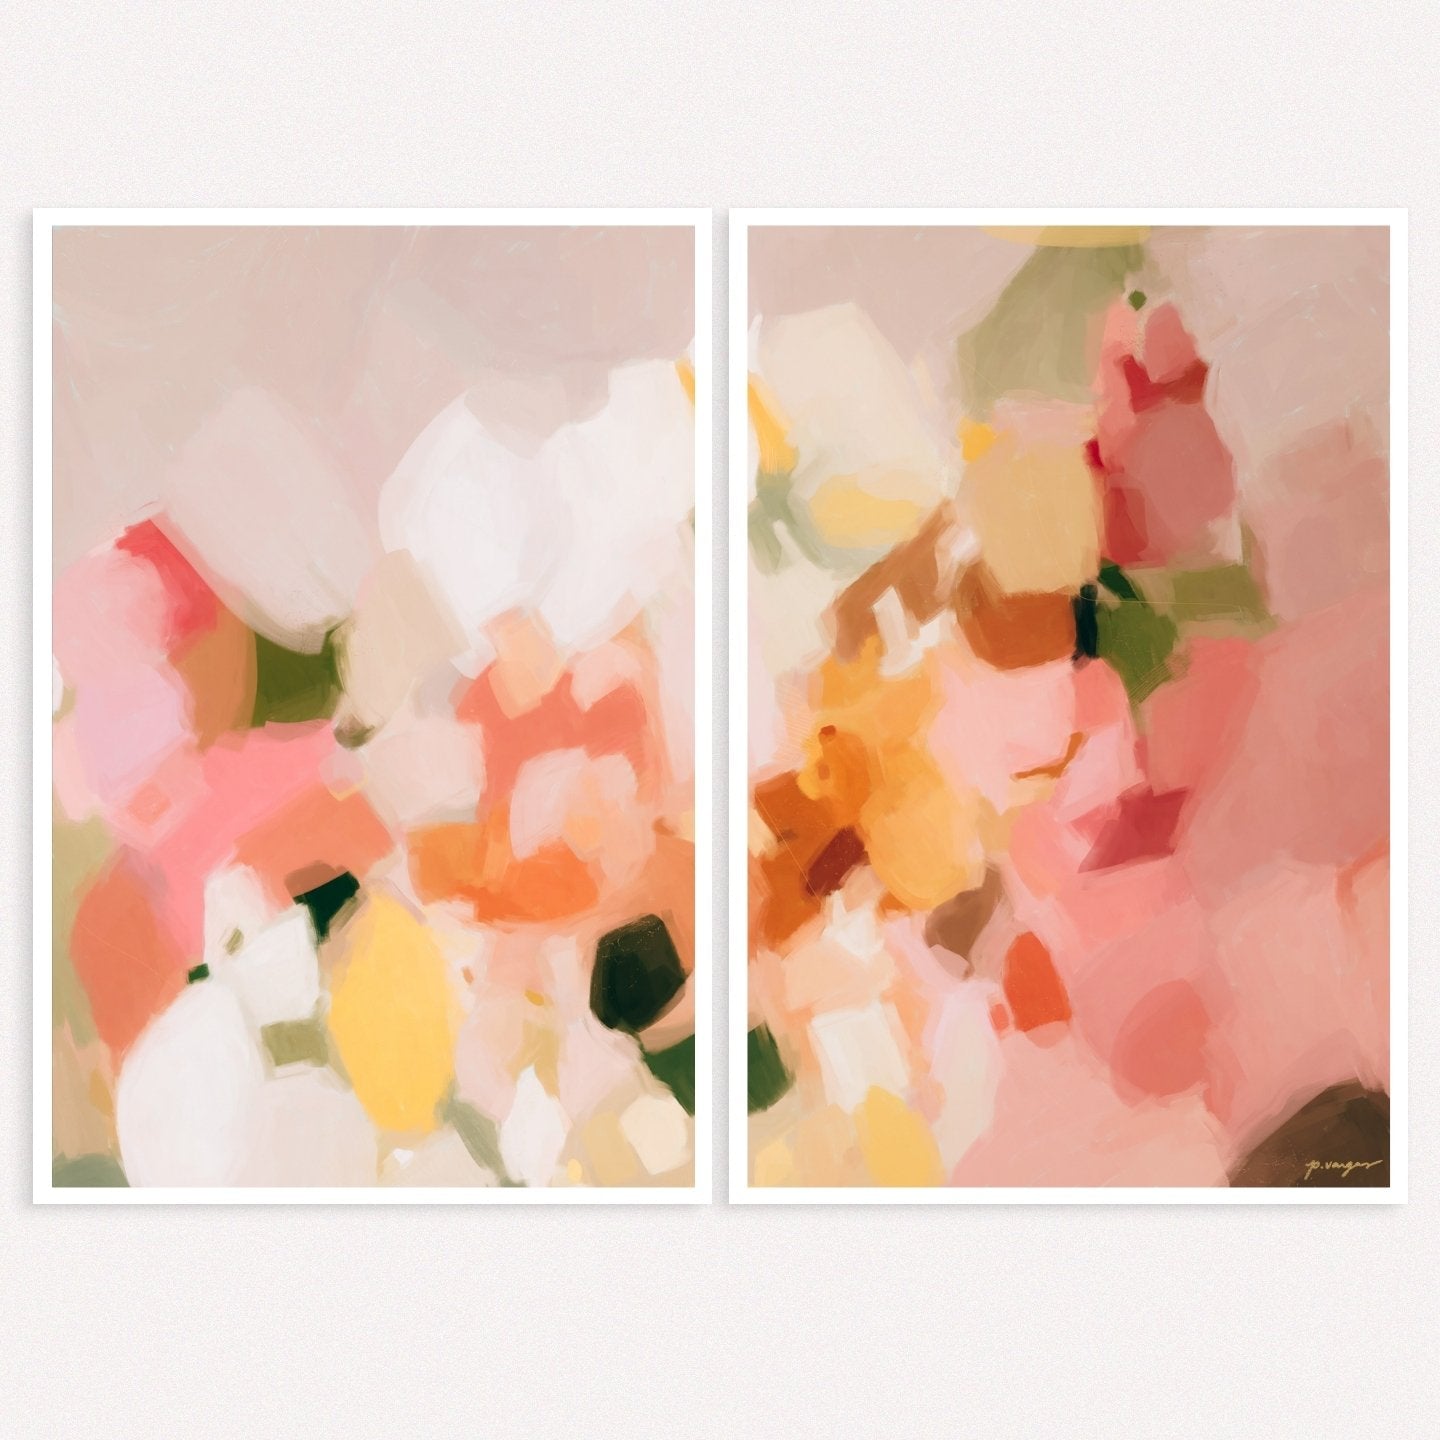 Margurite, set of two art prints - pink and yellow abstract wall art by Parima Studio